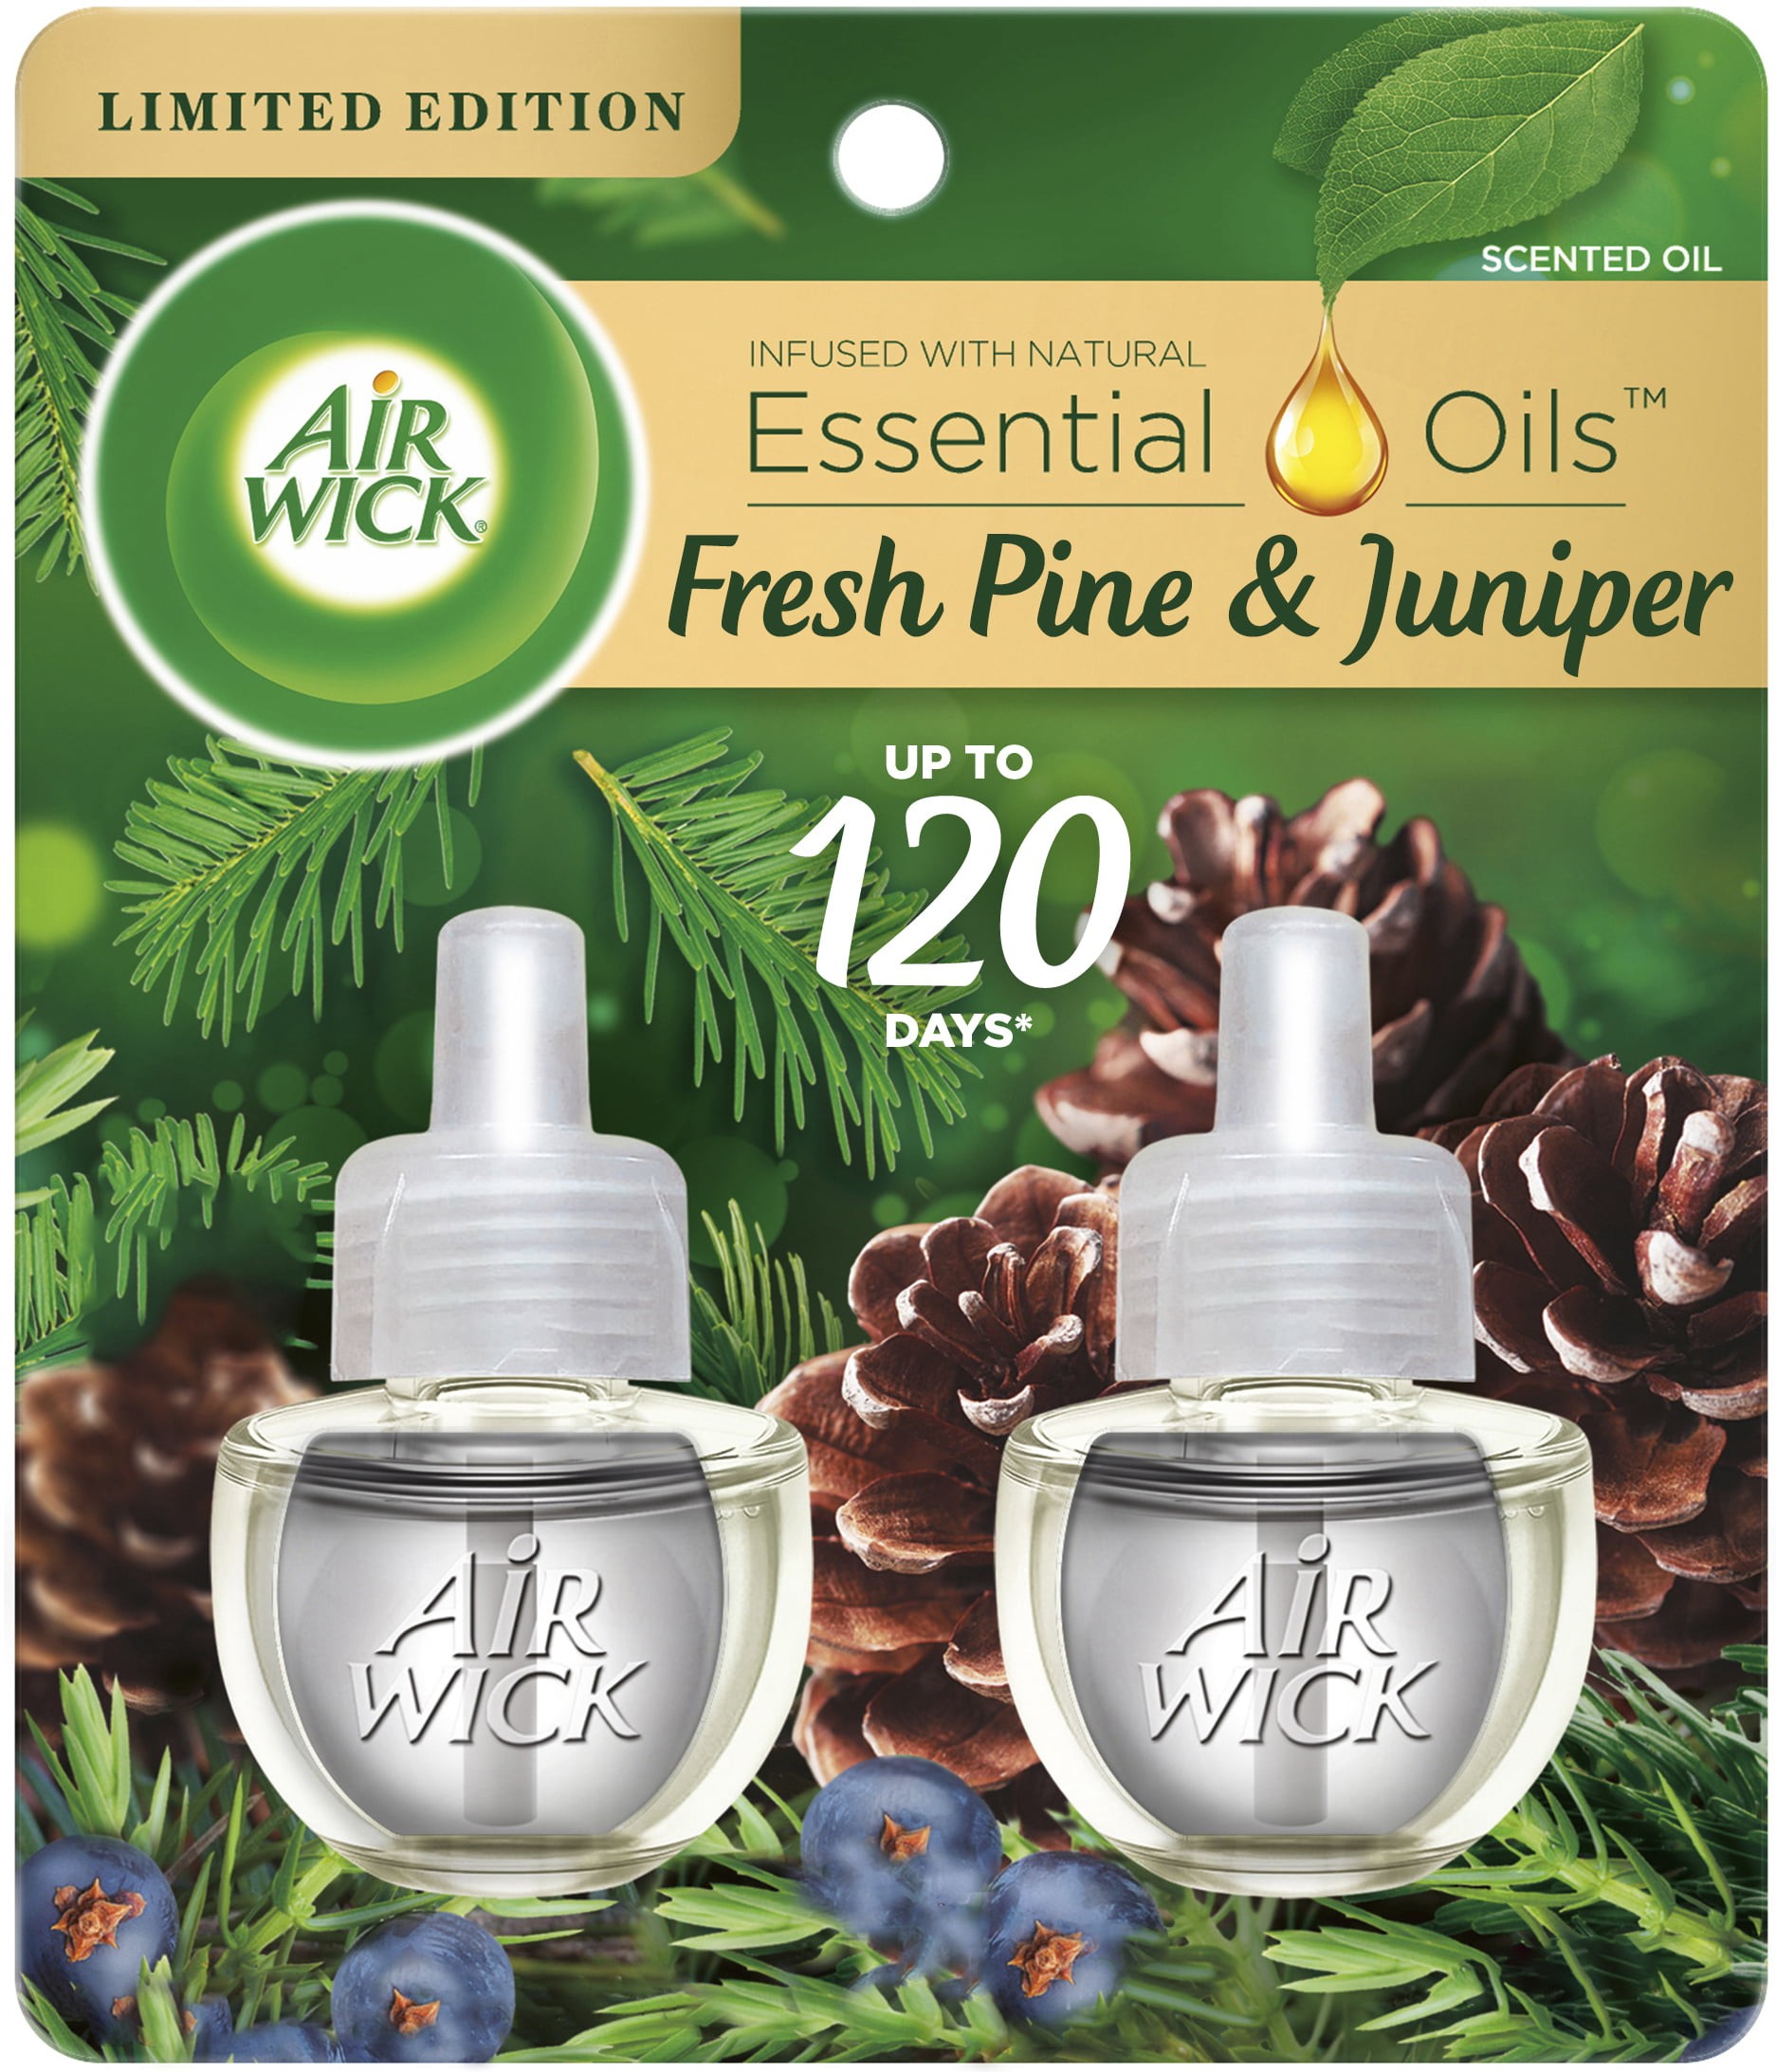 Air Wick Plug in Scented Oil Refill, 5ct, Sugared Fig & Honey, Fall Scent, Essential Oils, Air Freshener